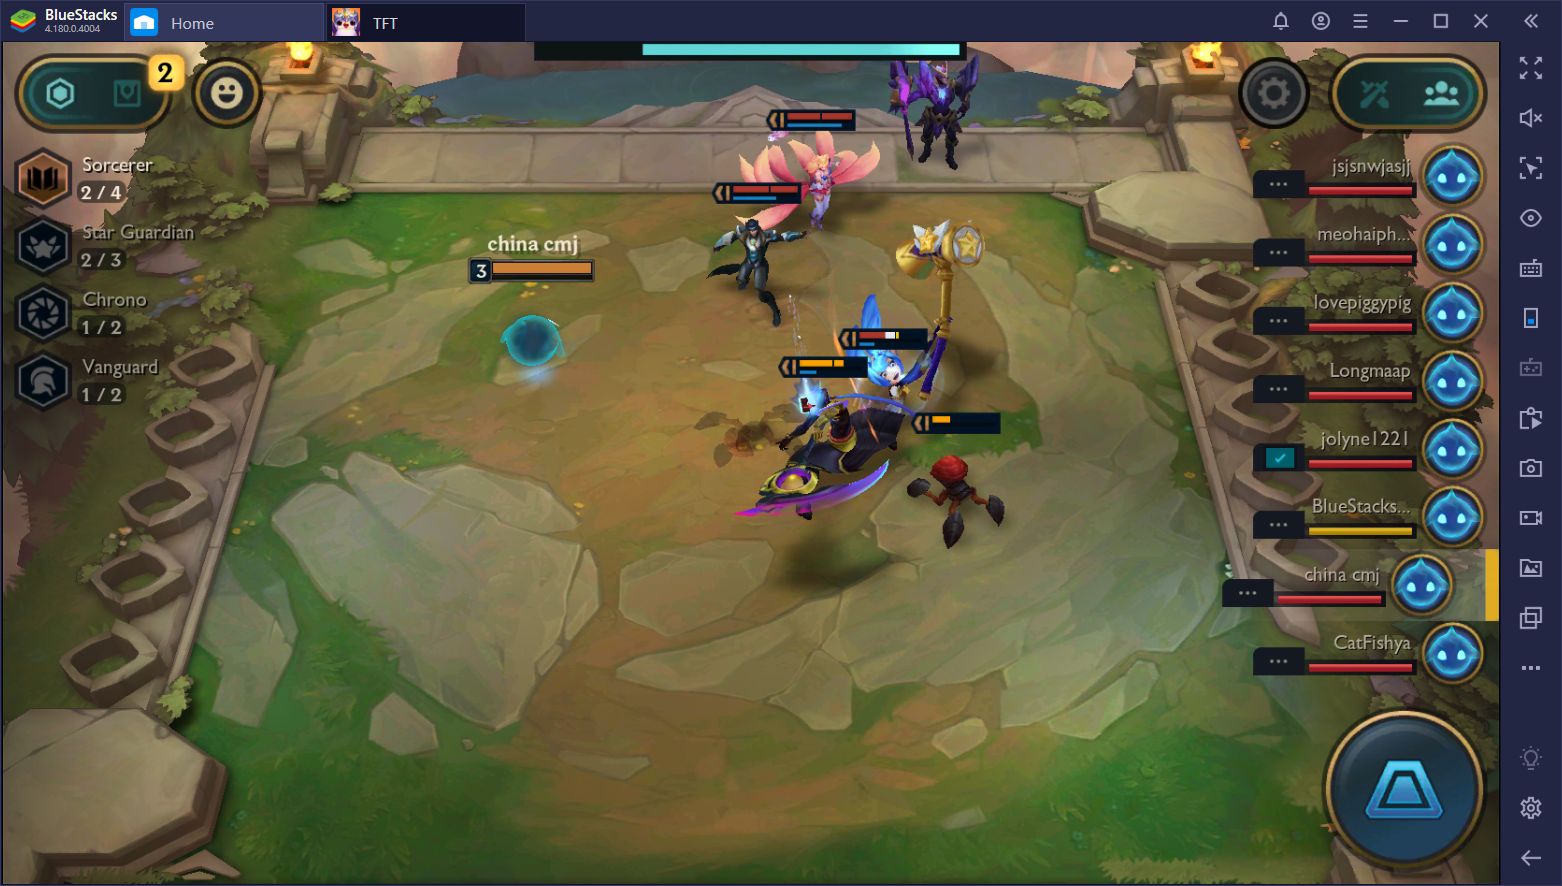 How to Get Started with Teamfight Tactics on BlueStacks